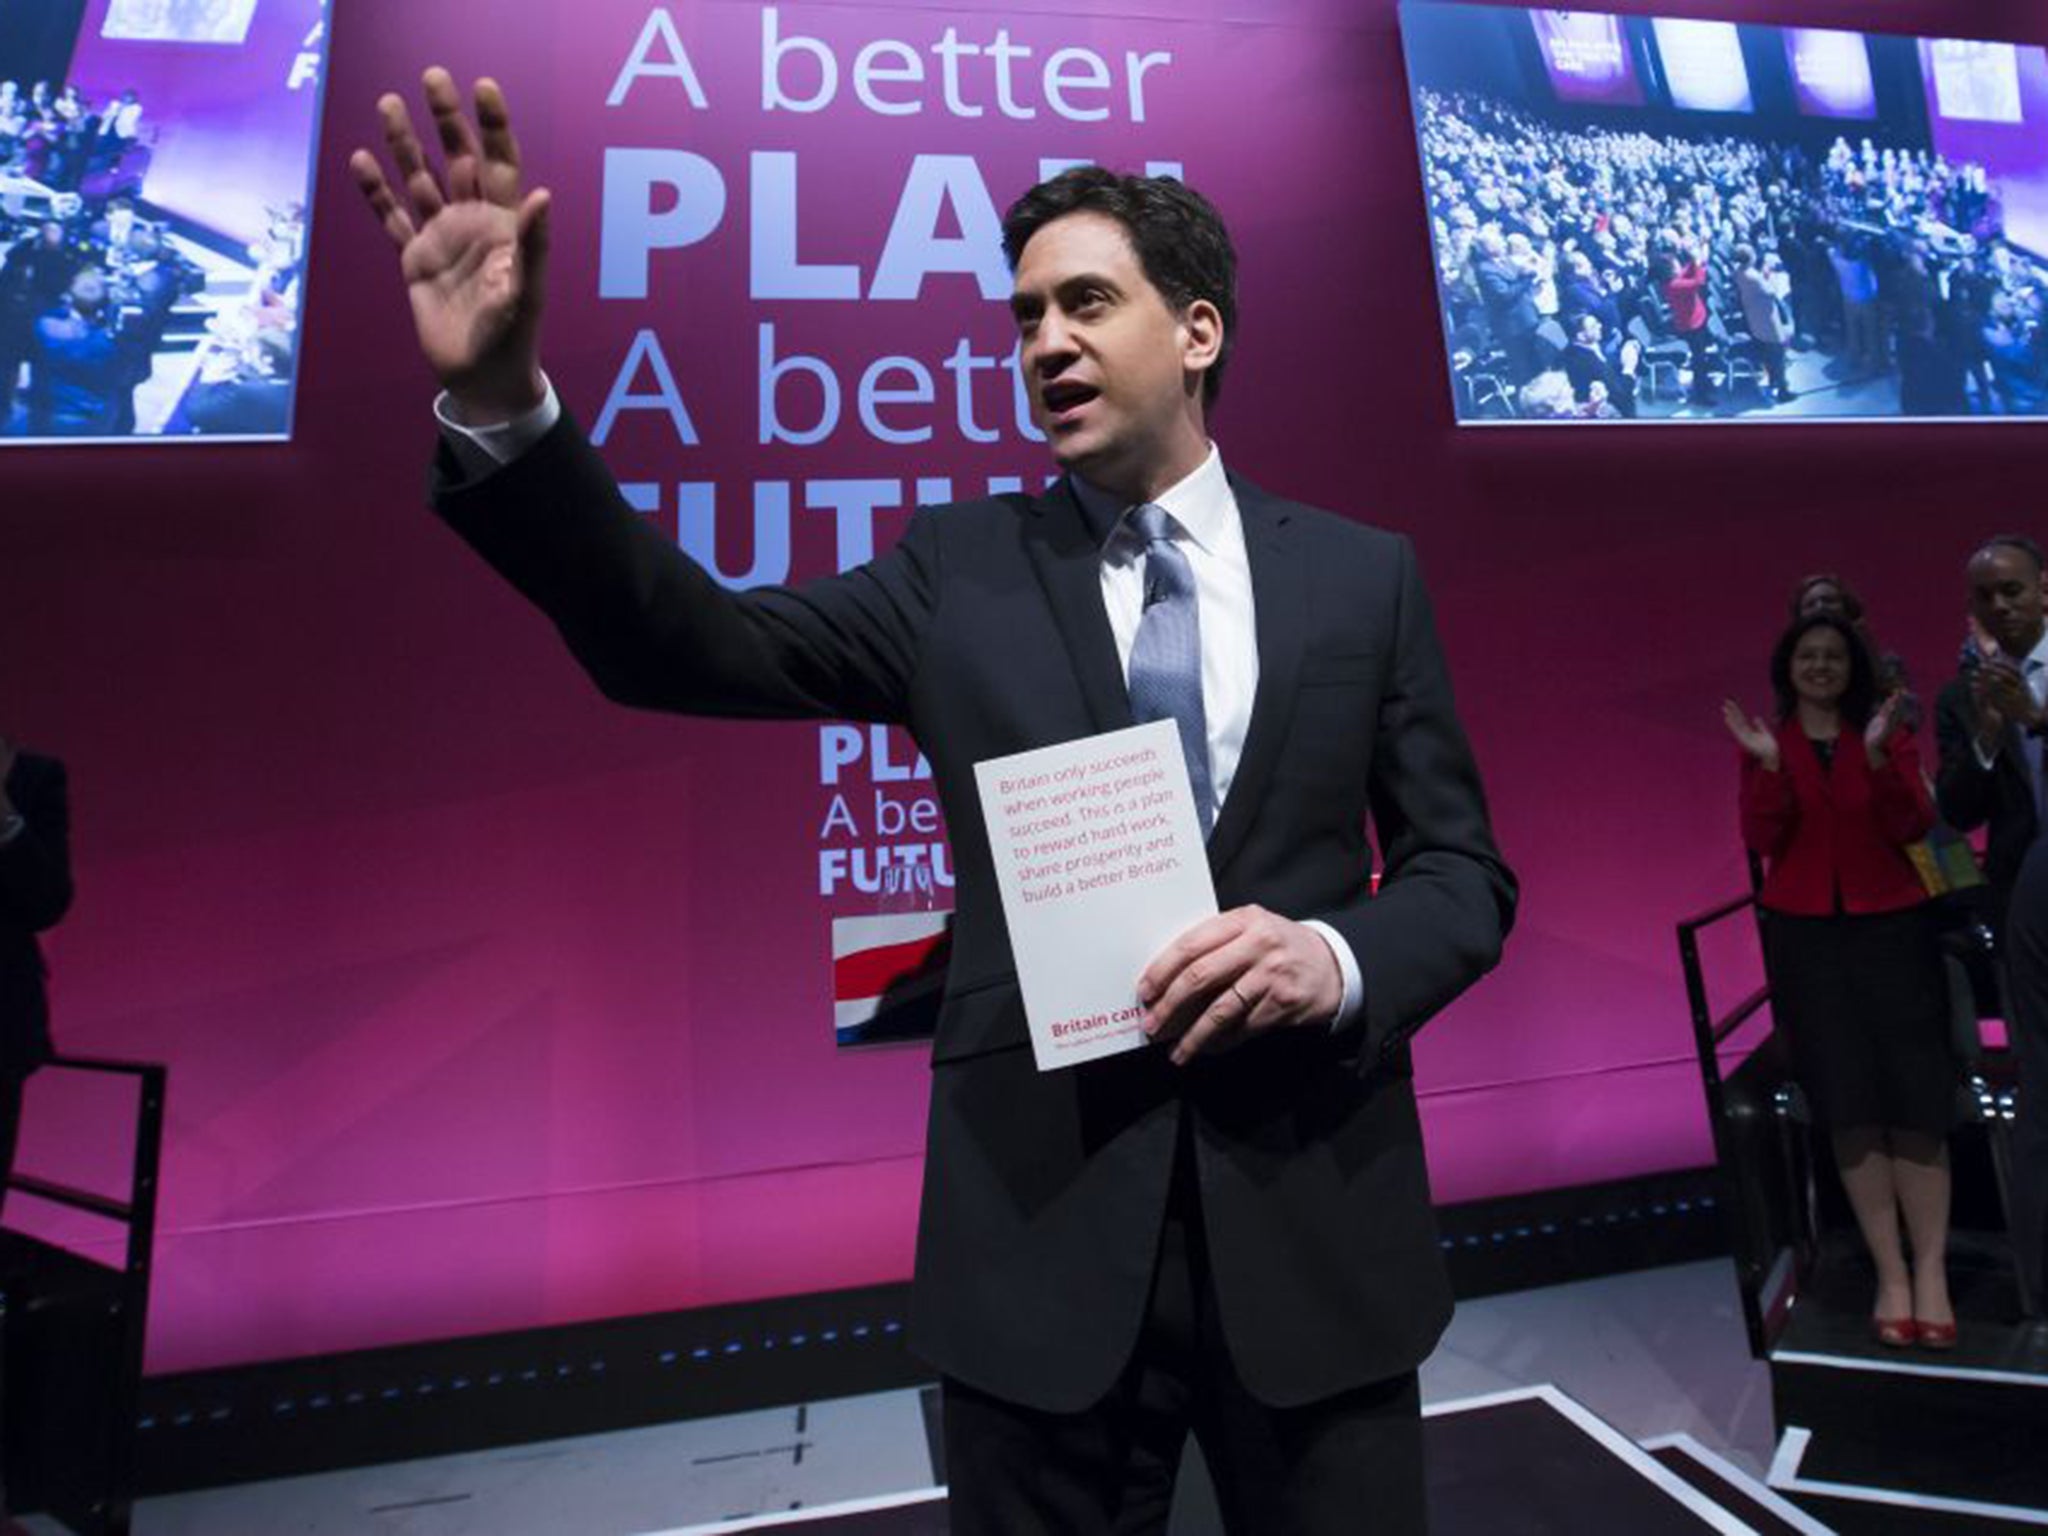 Ed Miliband at the launch of the Labour manifesto in Manchester on Monday